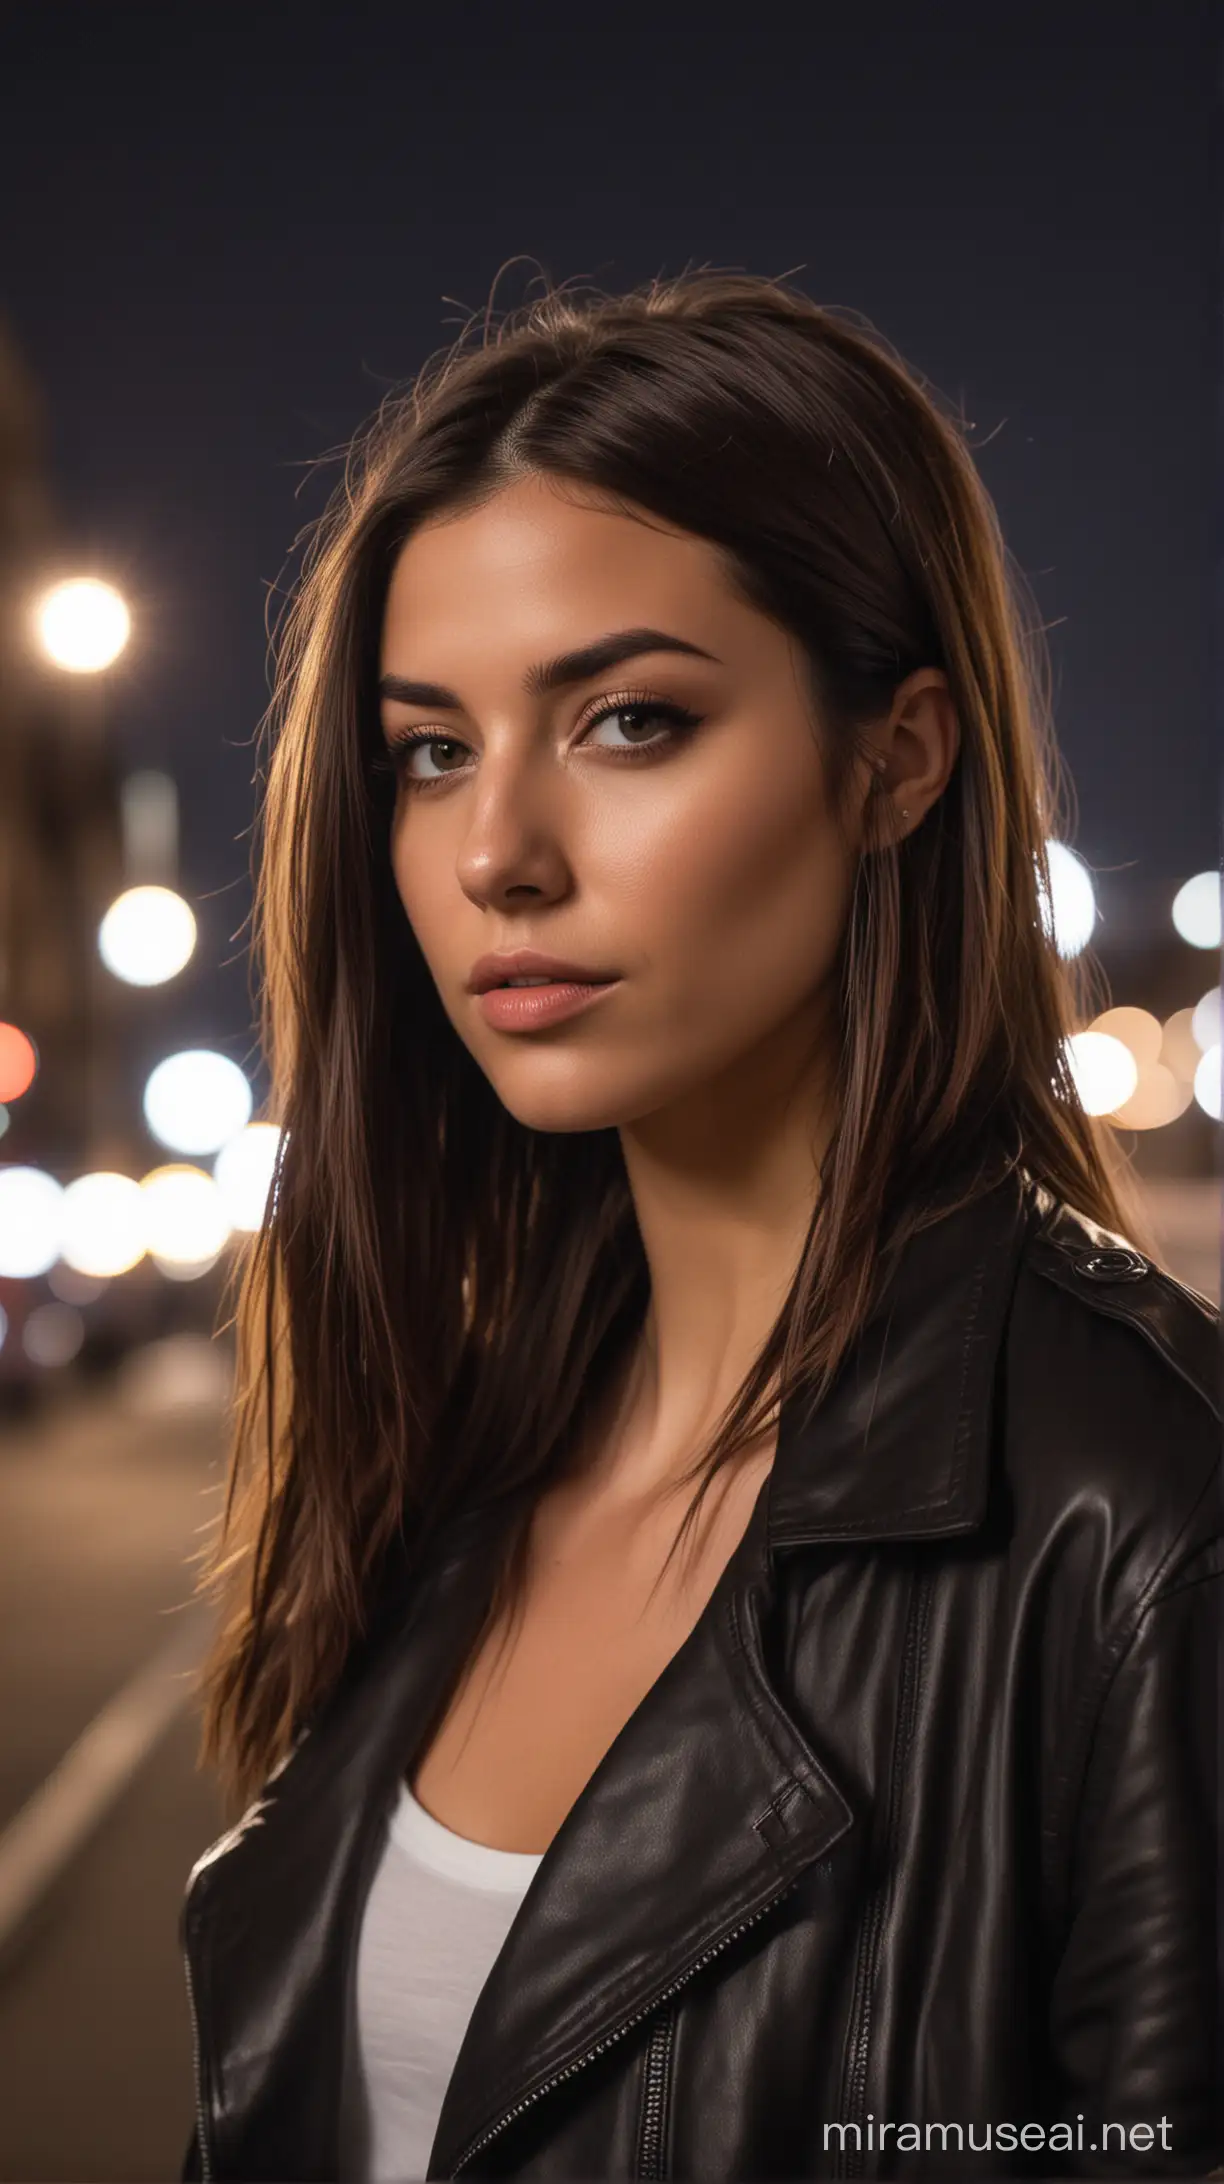 A trendy woman in her 20s with sleek, straight smokey brown hair, photographed in an urban nighttime setting. The image should emphasize the cool, edgy tone of her hair against a city backdrop